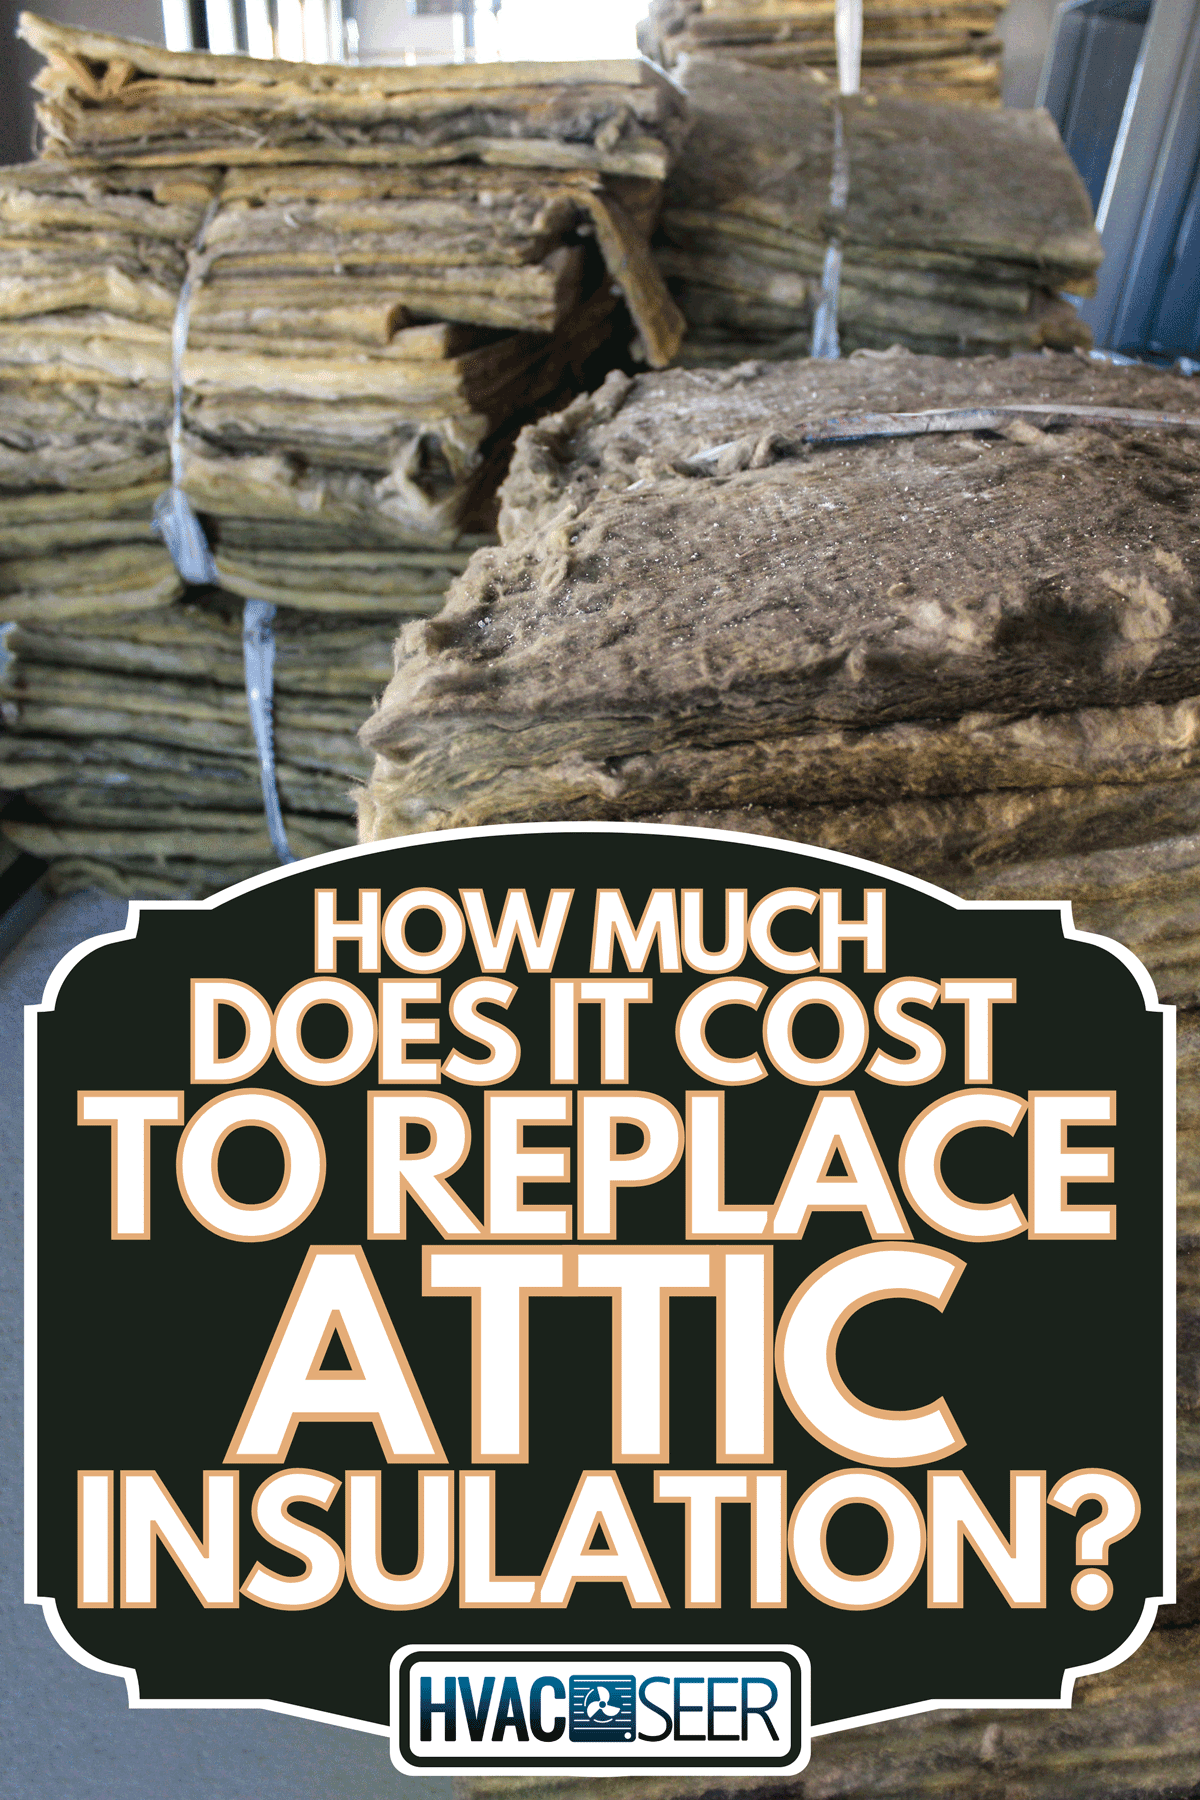 Old panels of insulation wool remove from attic, How Much Does It Cost To Replace Attic Insulation?